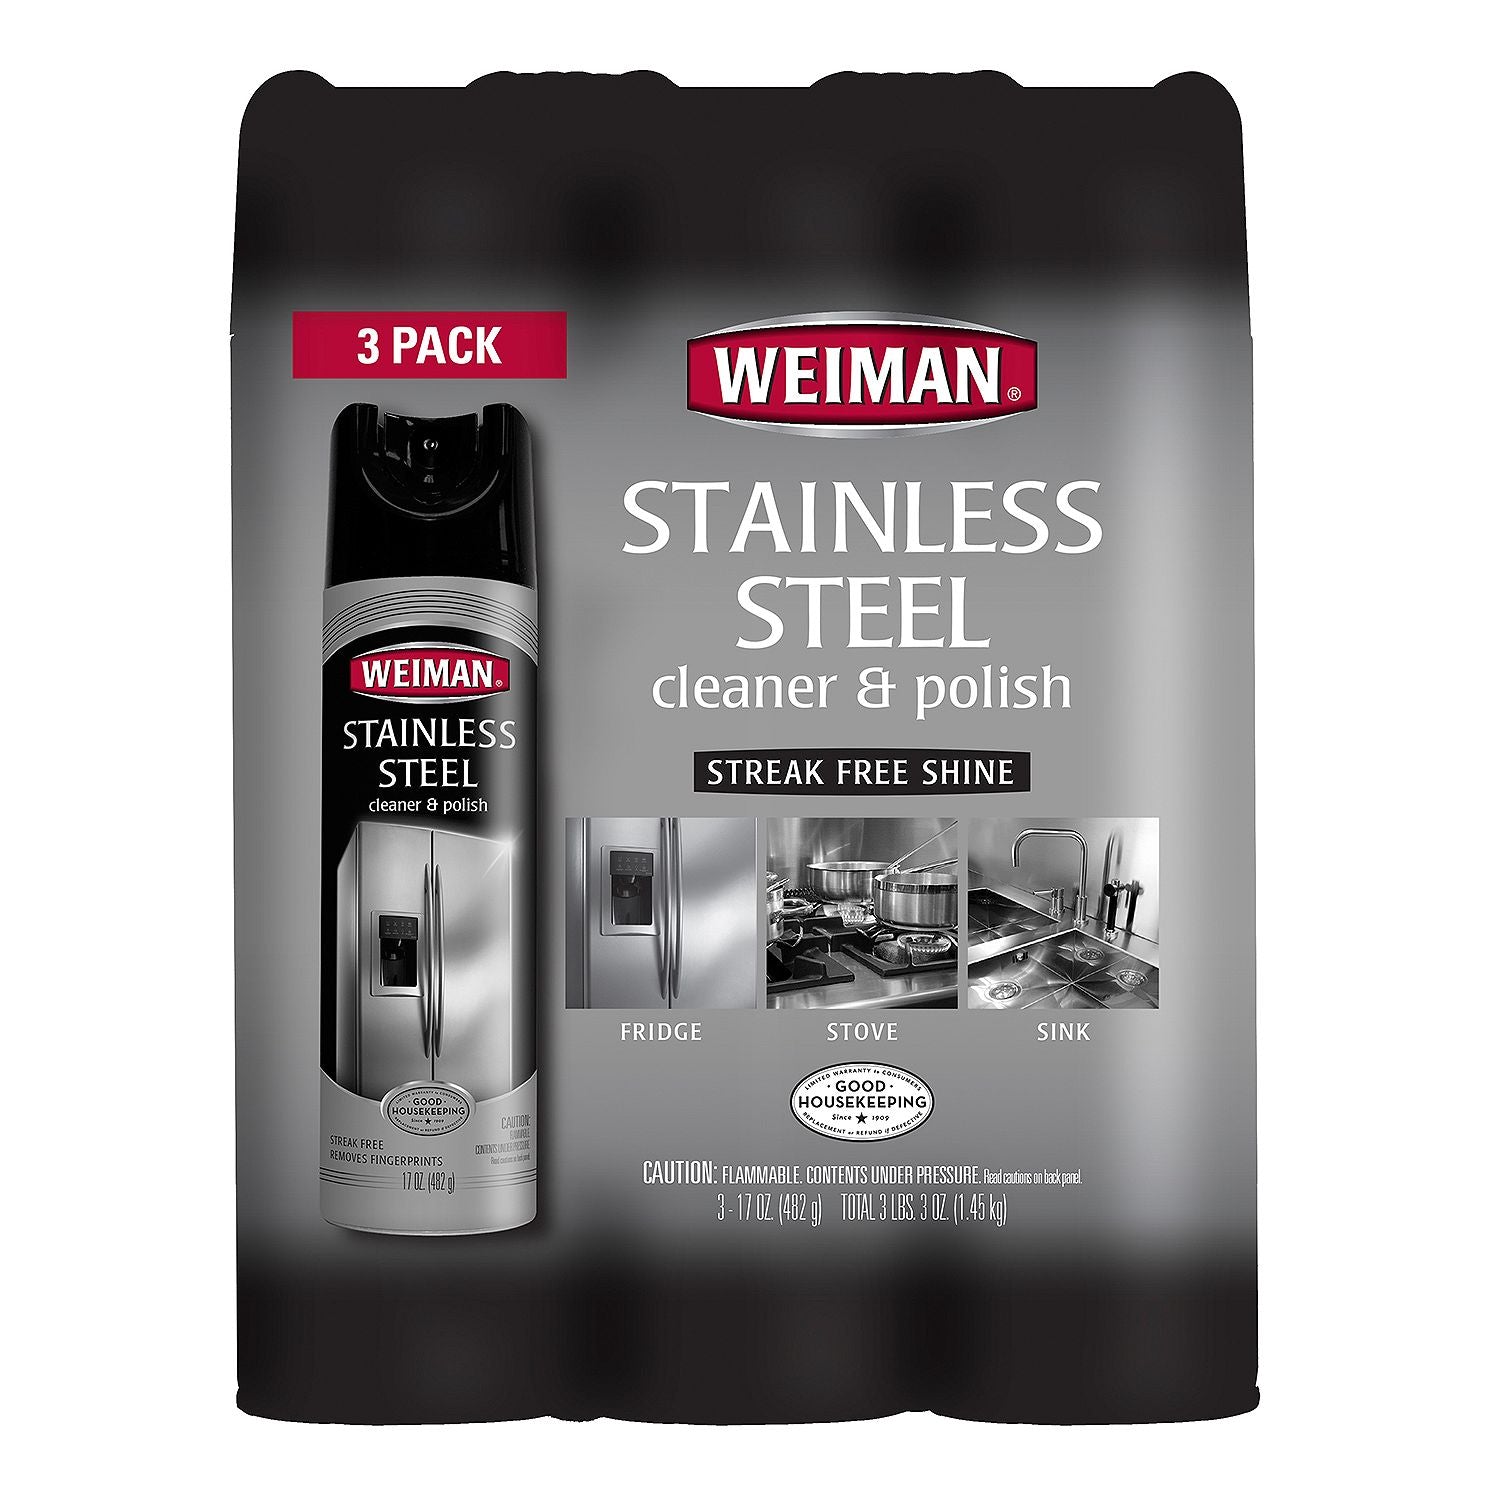 Weiman Stainless Steel Cleaner and Polish - (2 Pack) - Protects Appliances